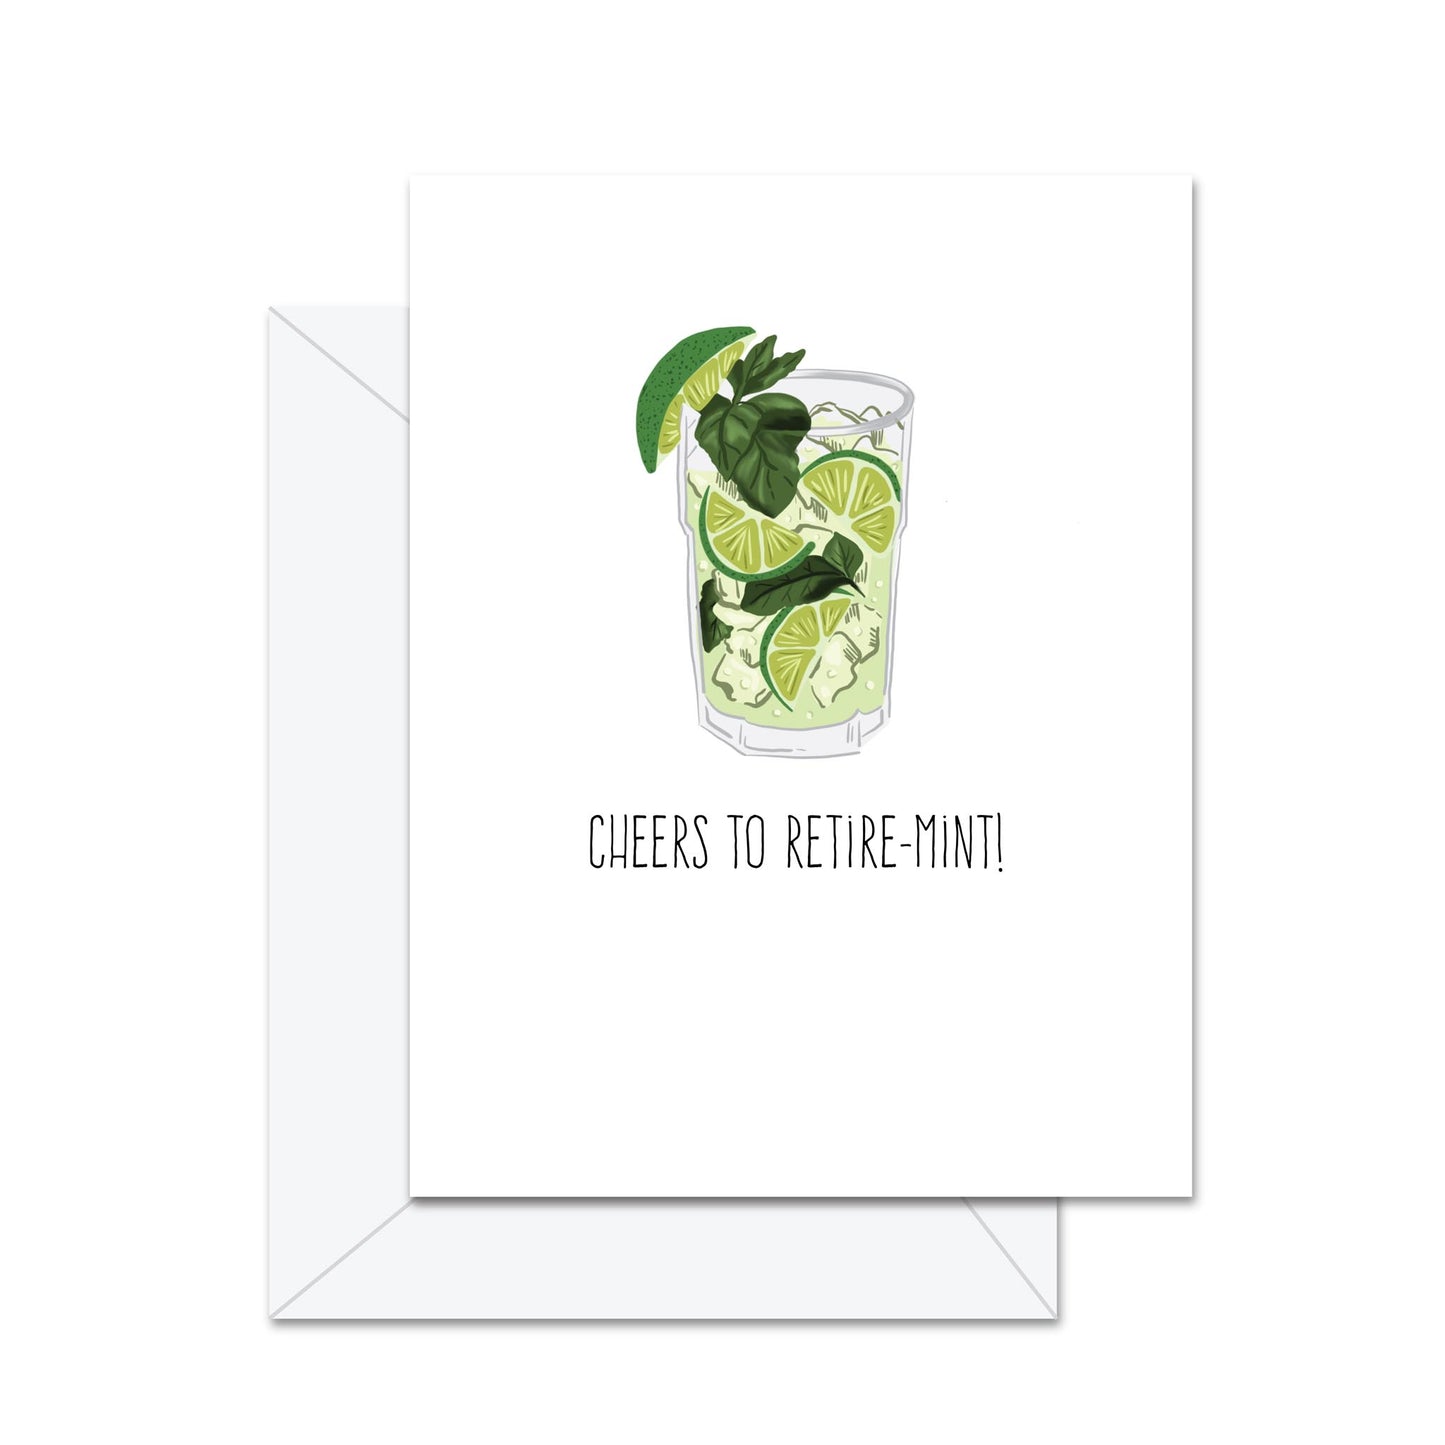 Cheers To Retire-Mint! - Greeting Card